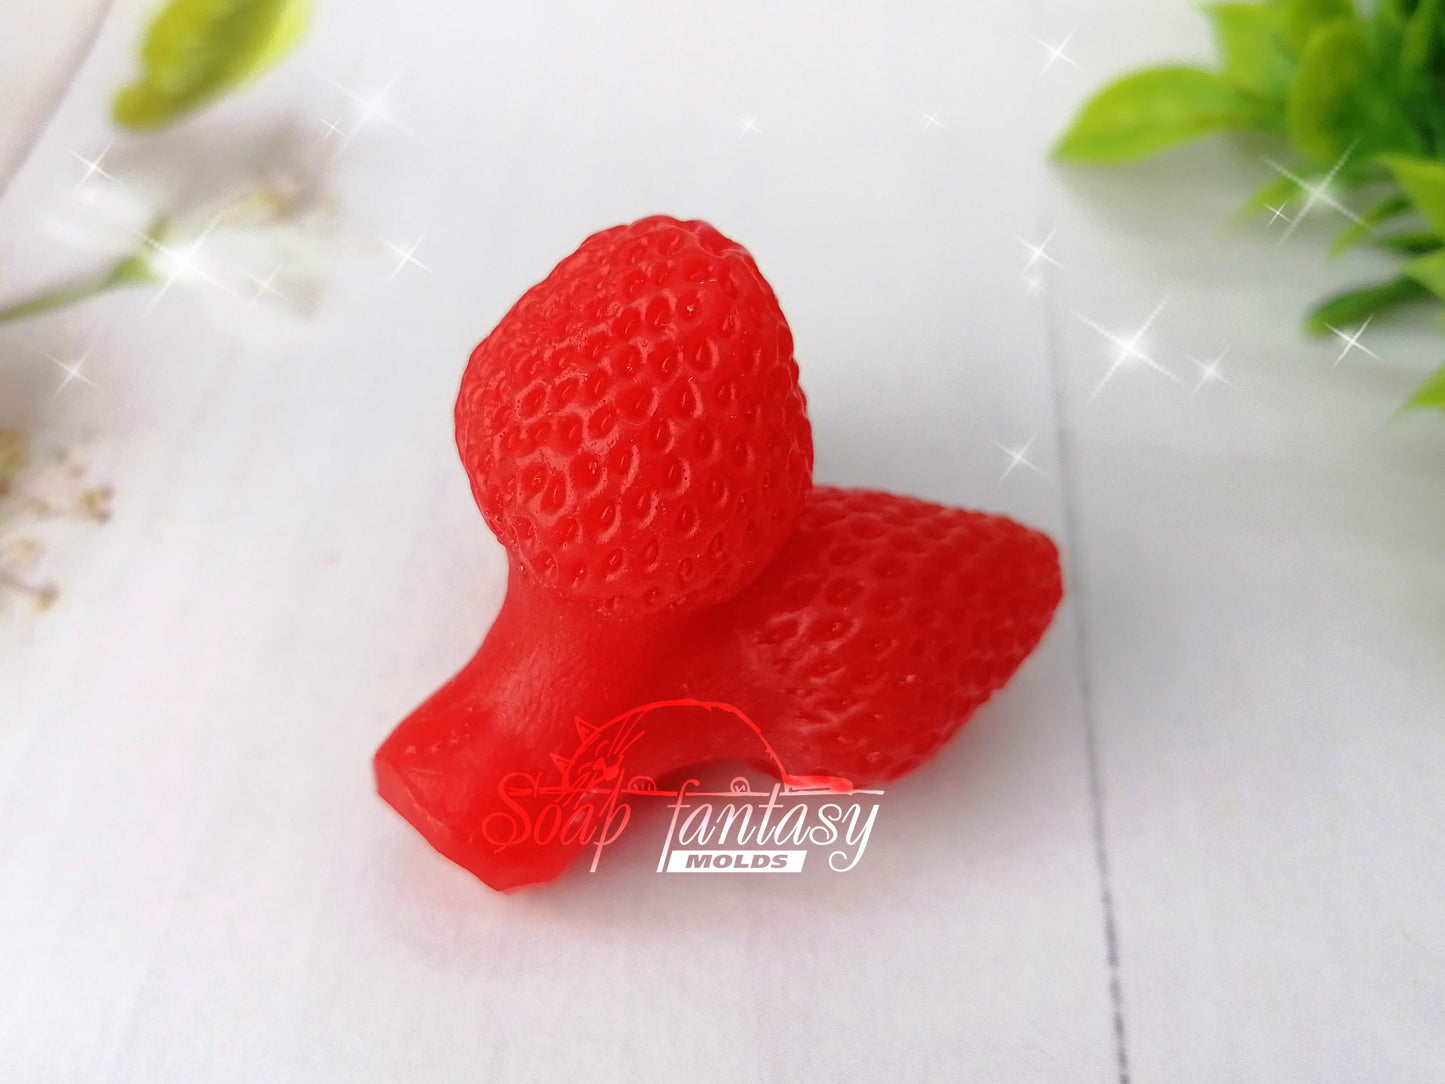 Triple strawberry bouquet inserts silicone mold for soap making